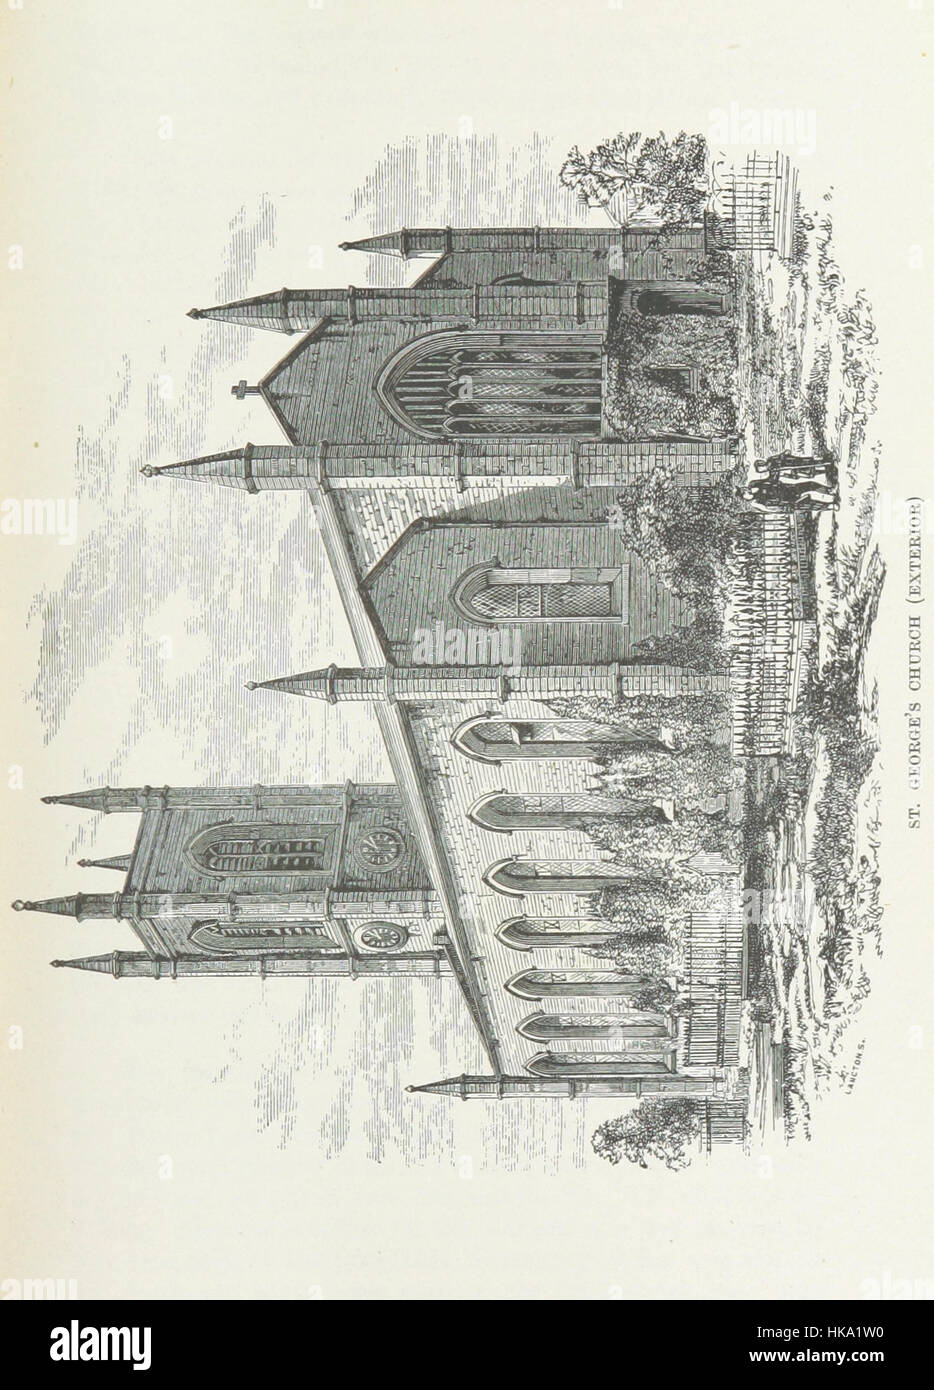 Annals of Hyde and district. Containing historical reminiscences of Denton, Haughton, Dukinfield, Mottram, Longdendale, Bredbury, Marple, and the neighbouring townships. [Illustrated.] Image taken from page 95 of 'Annals Stock Photo